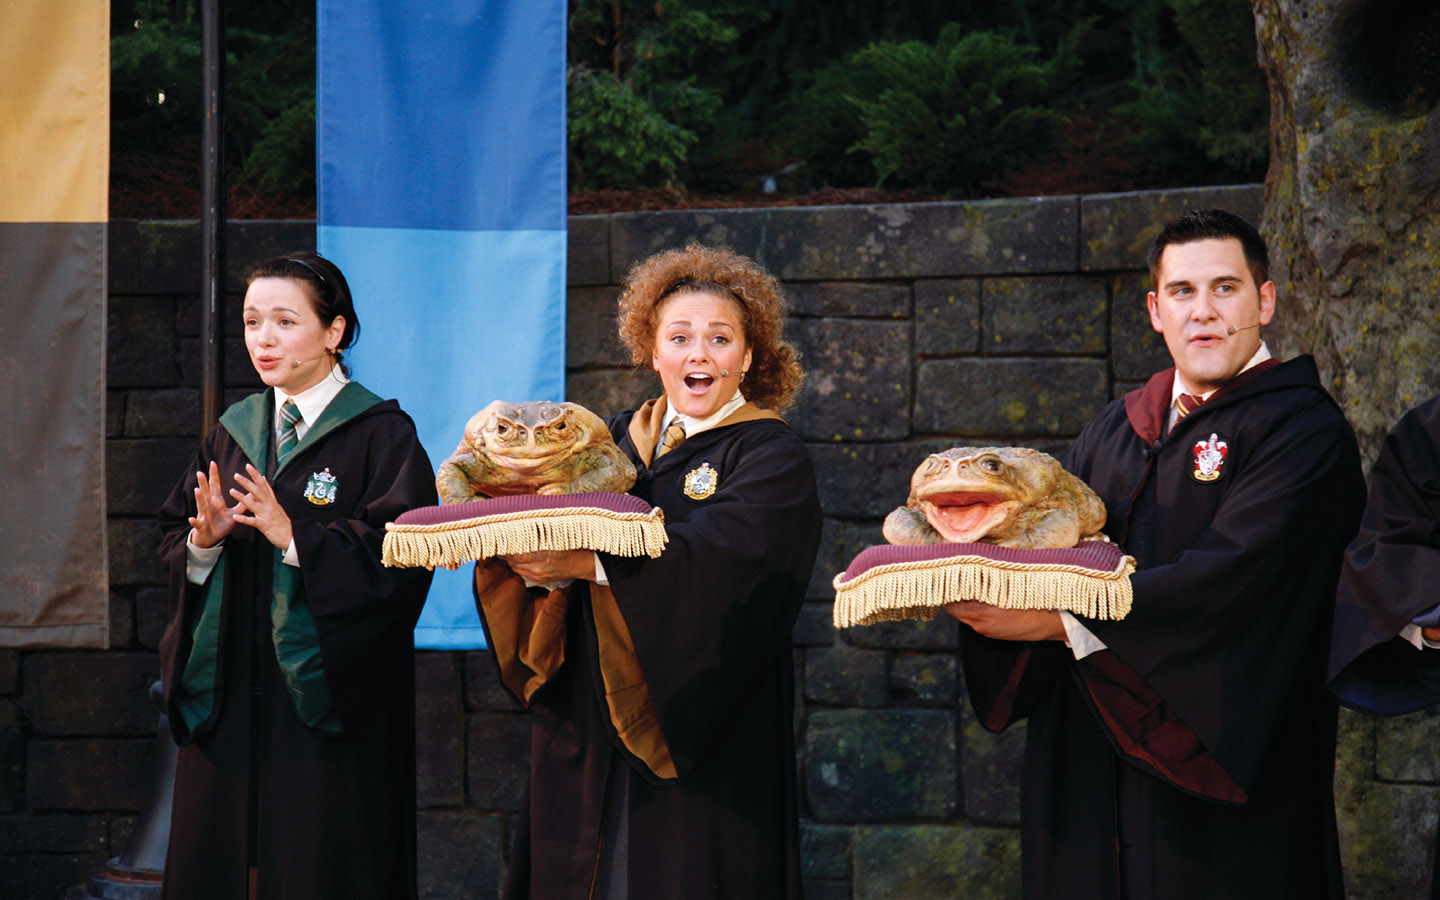 Hogwarts Frog Choir in The Wizarding World of Harry Potter